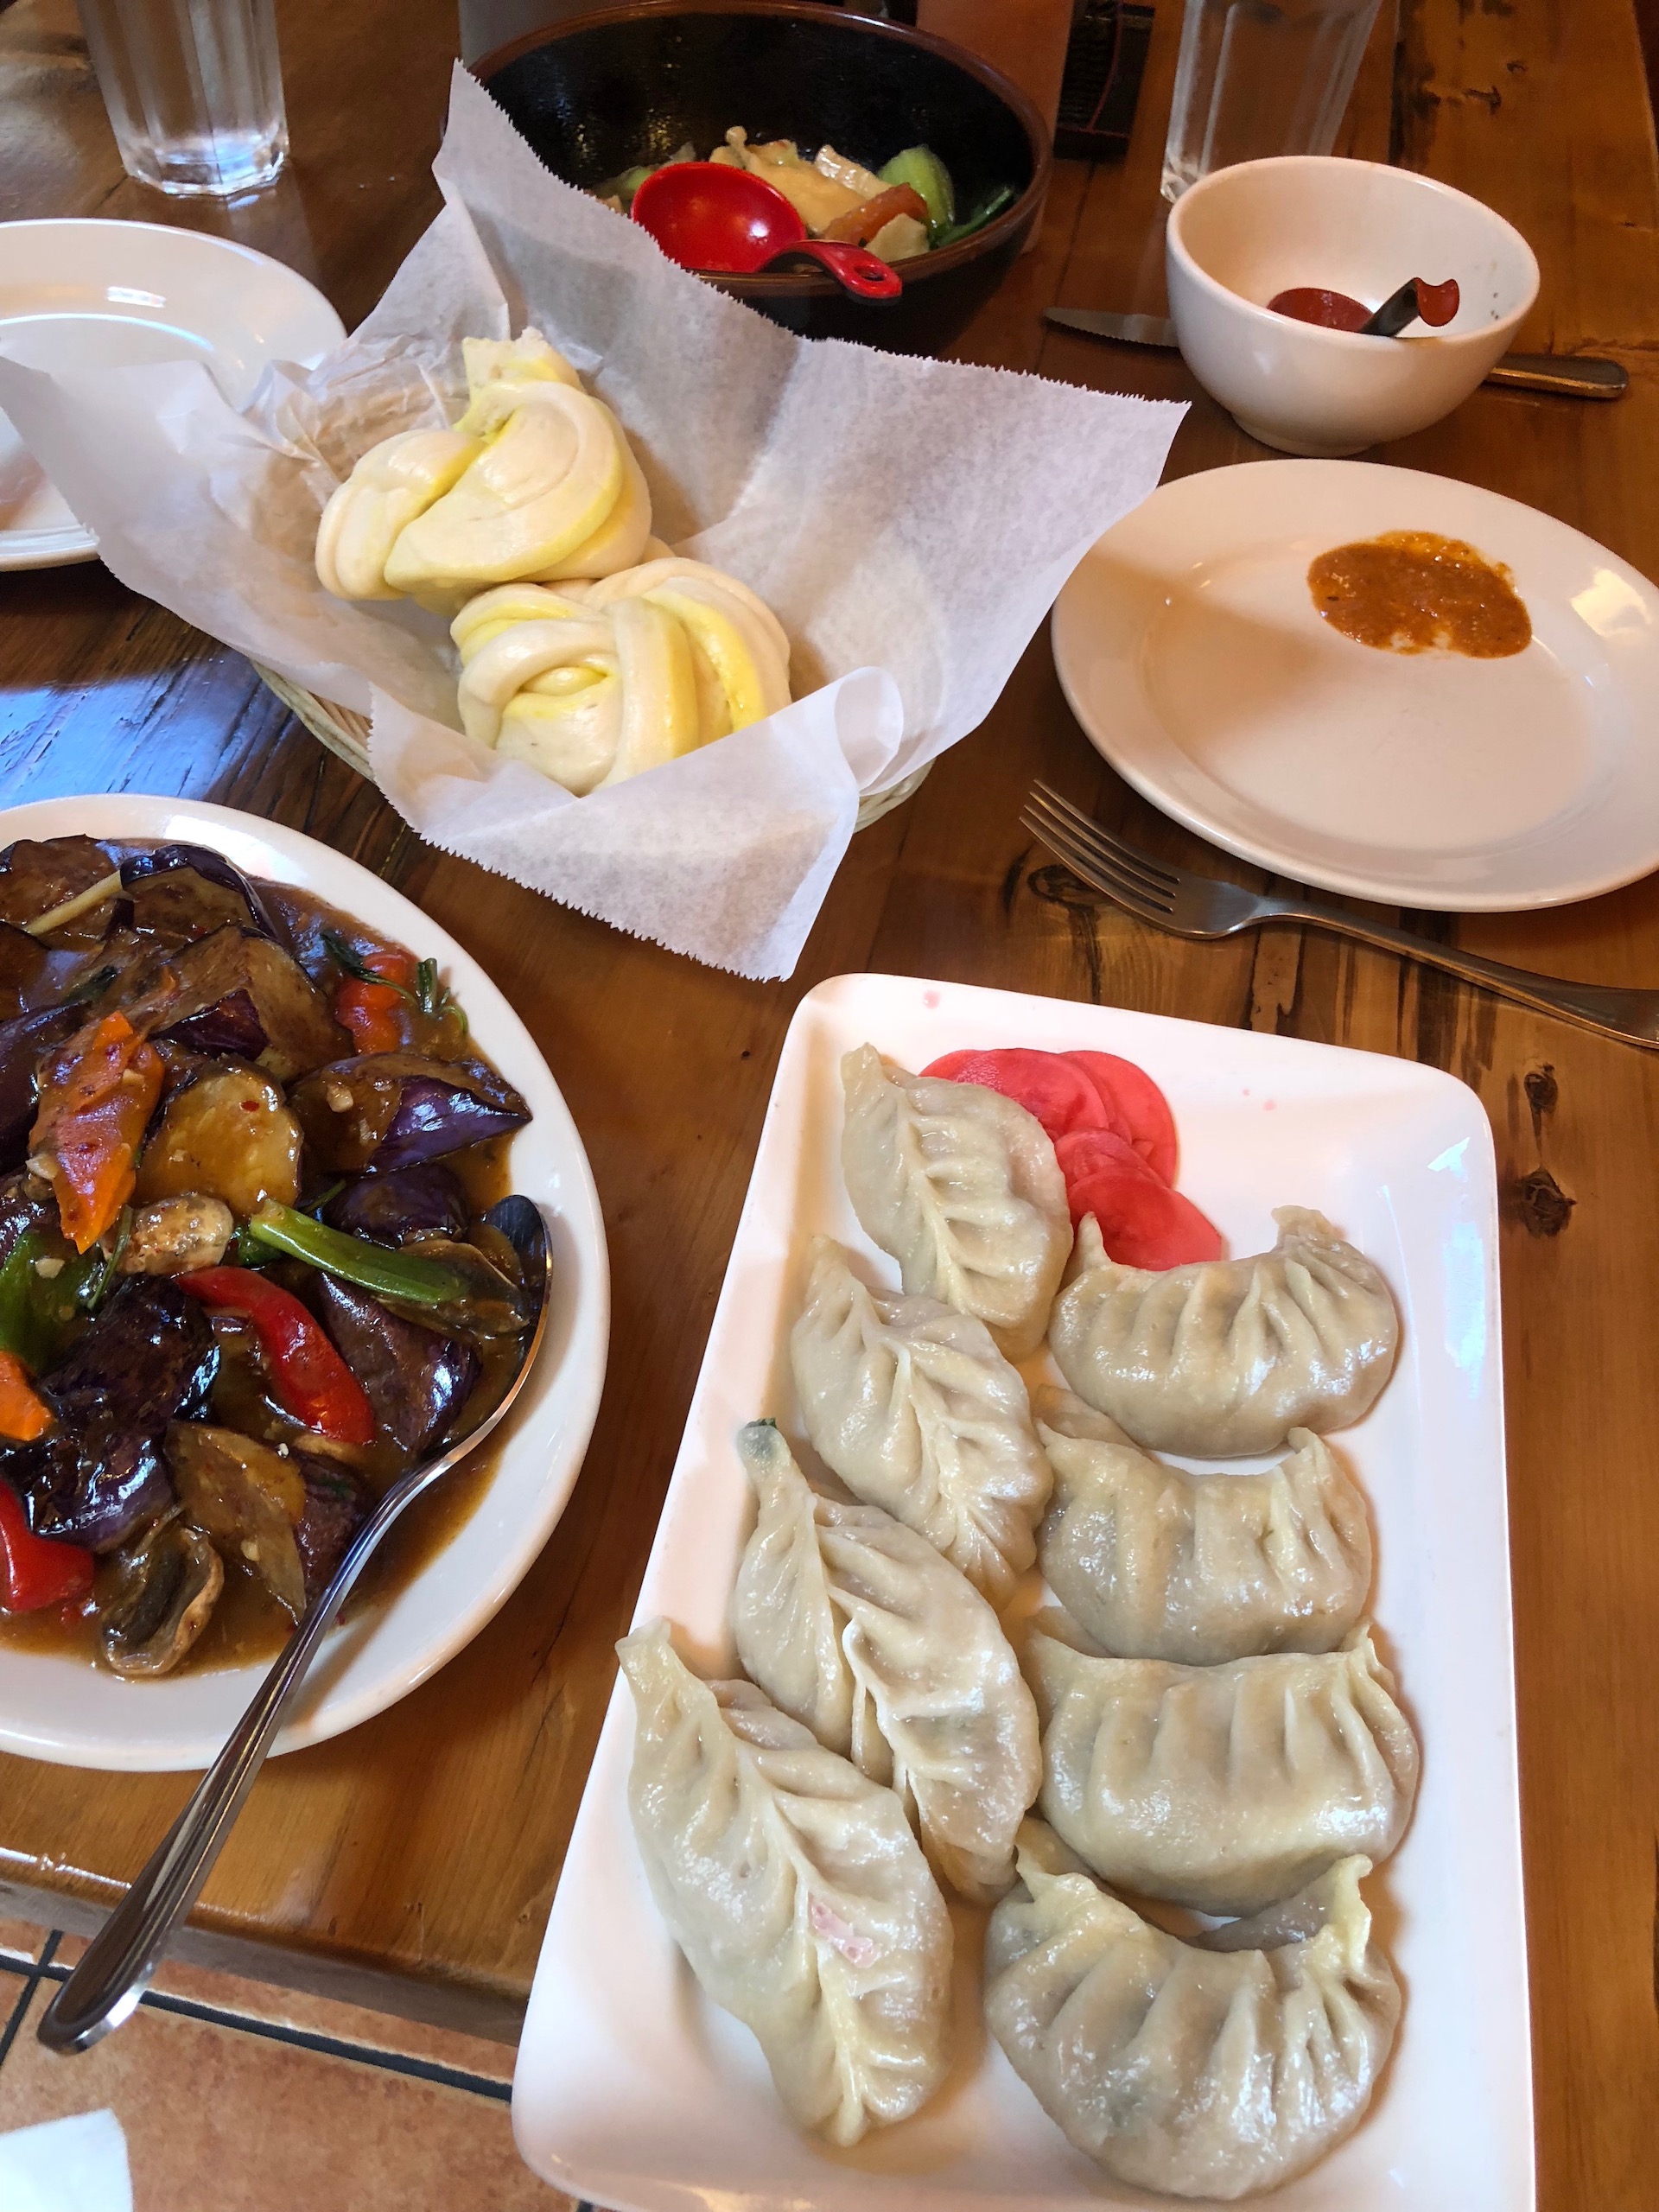 Momos are a centerpiece of both Nepalese and Tibetan cuisines, here as part of a meal at Nomad Tibetan